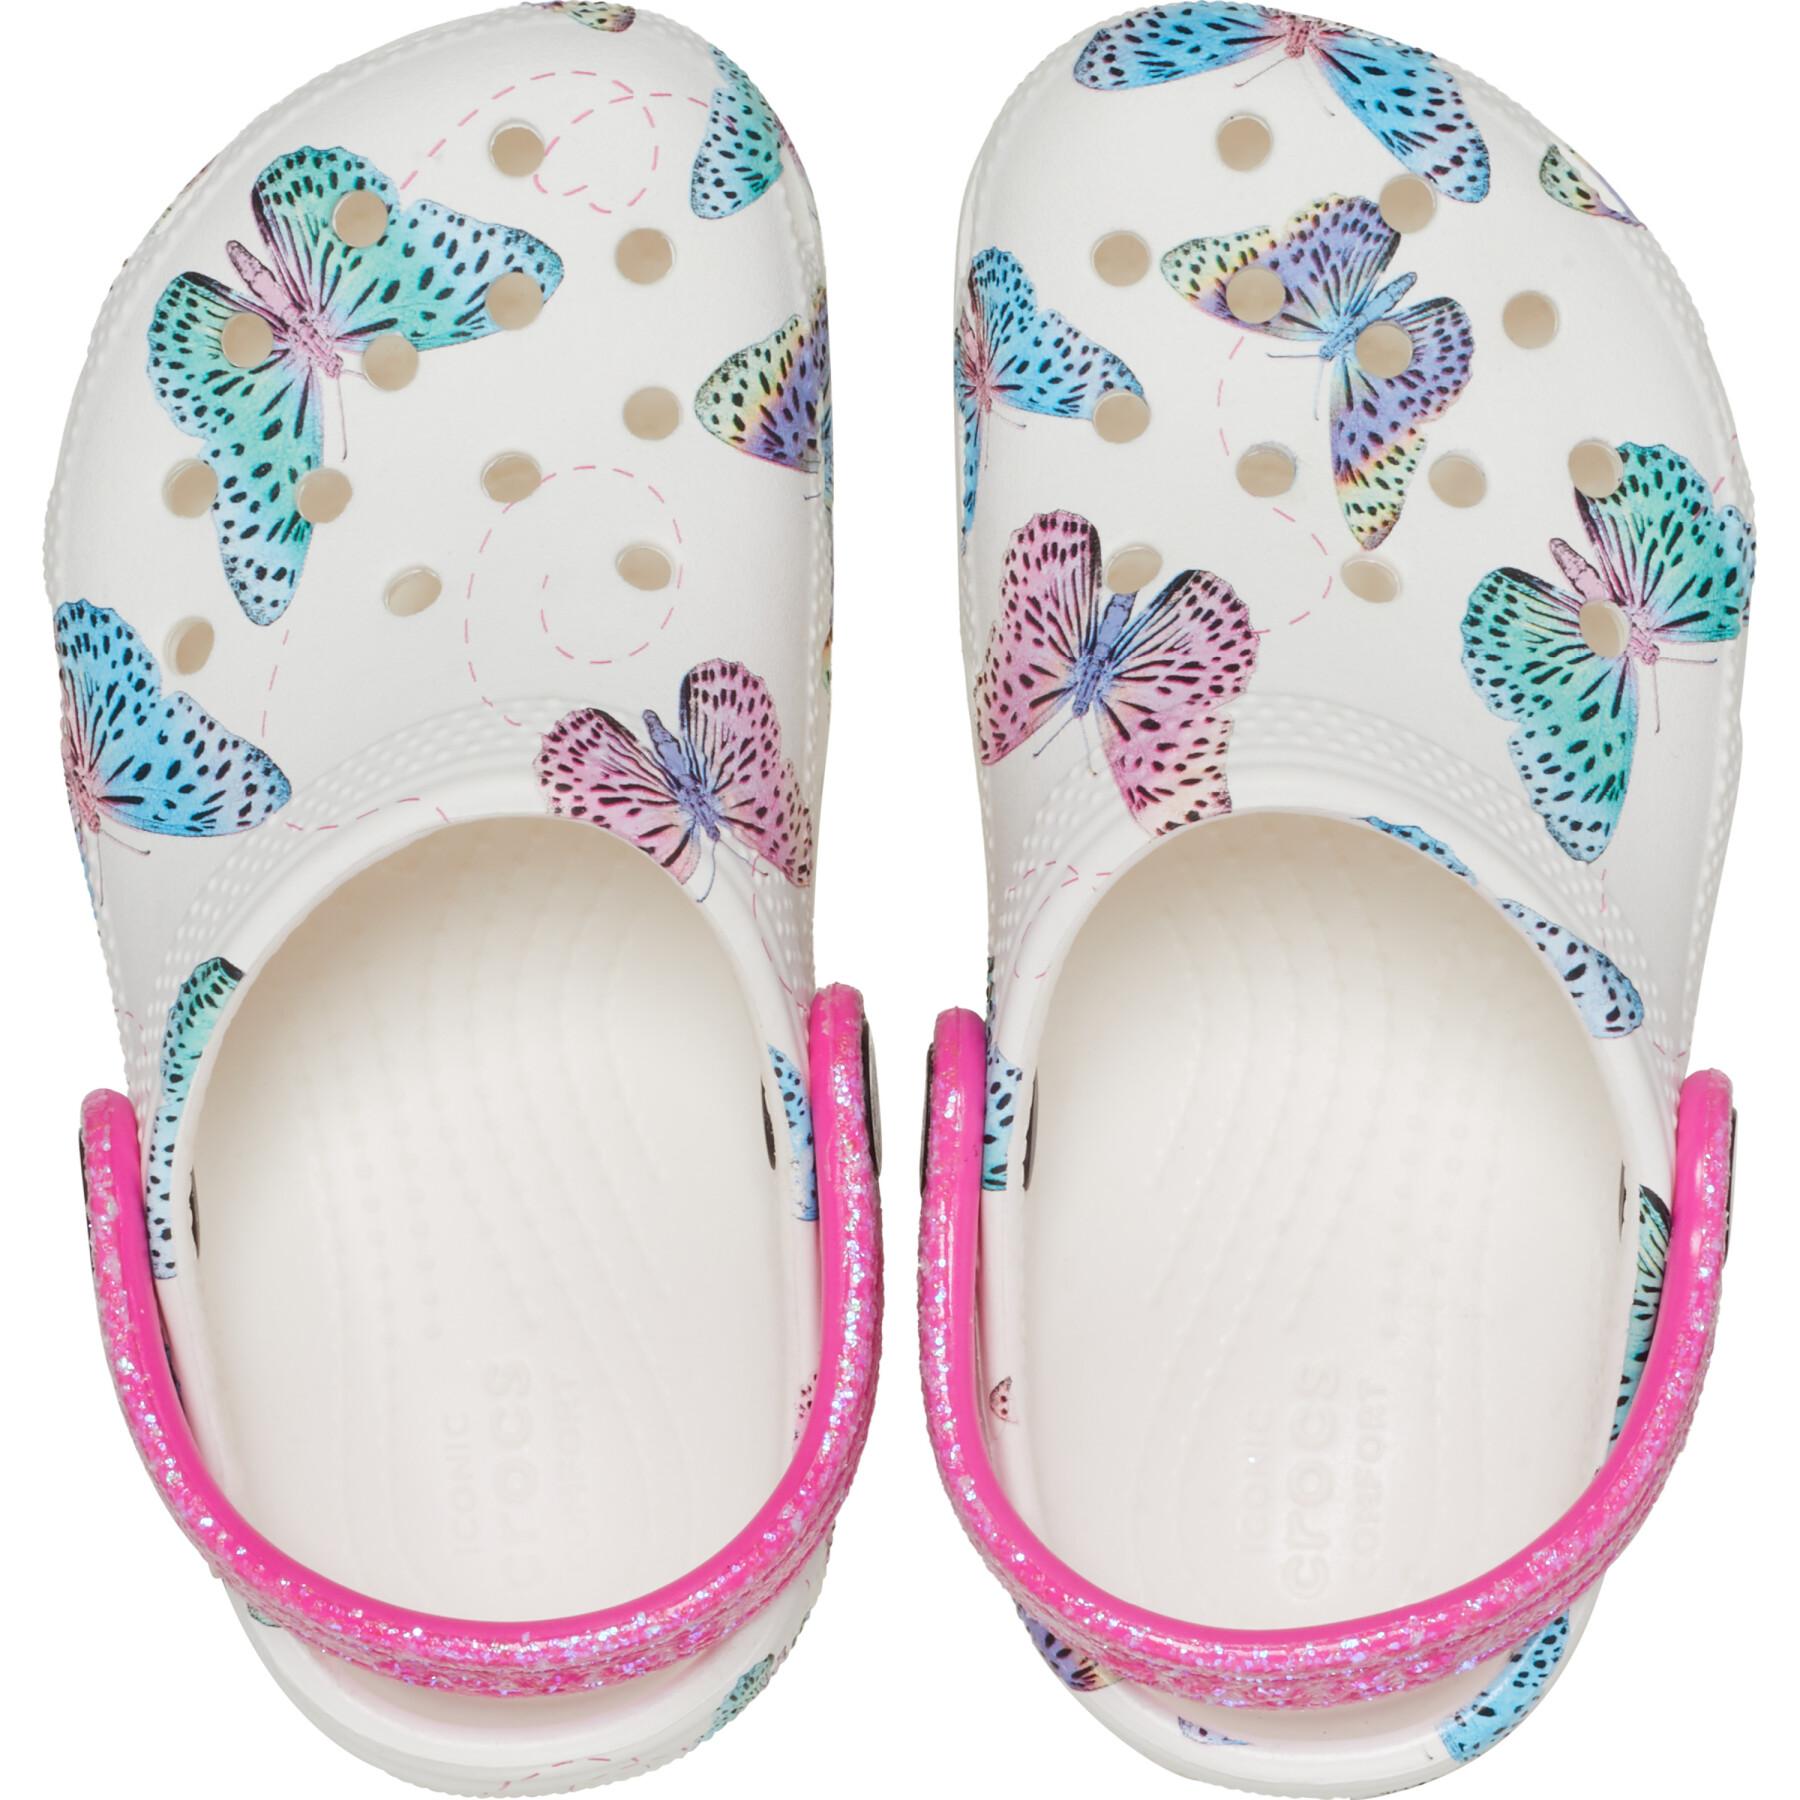 Baby clogs Crocs Classic Butterfly